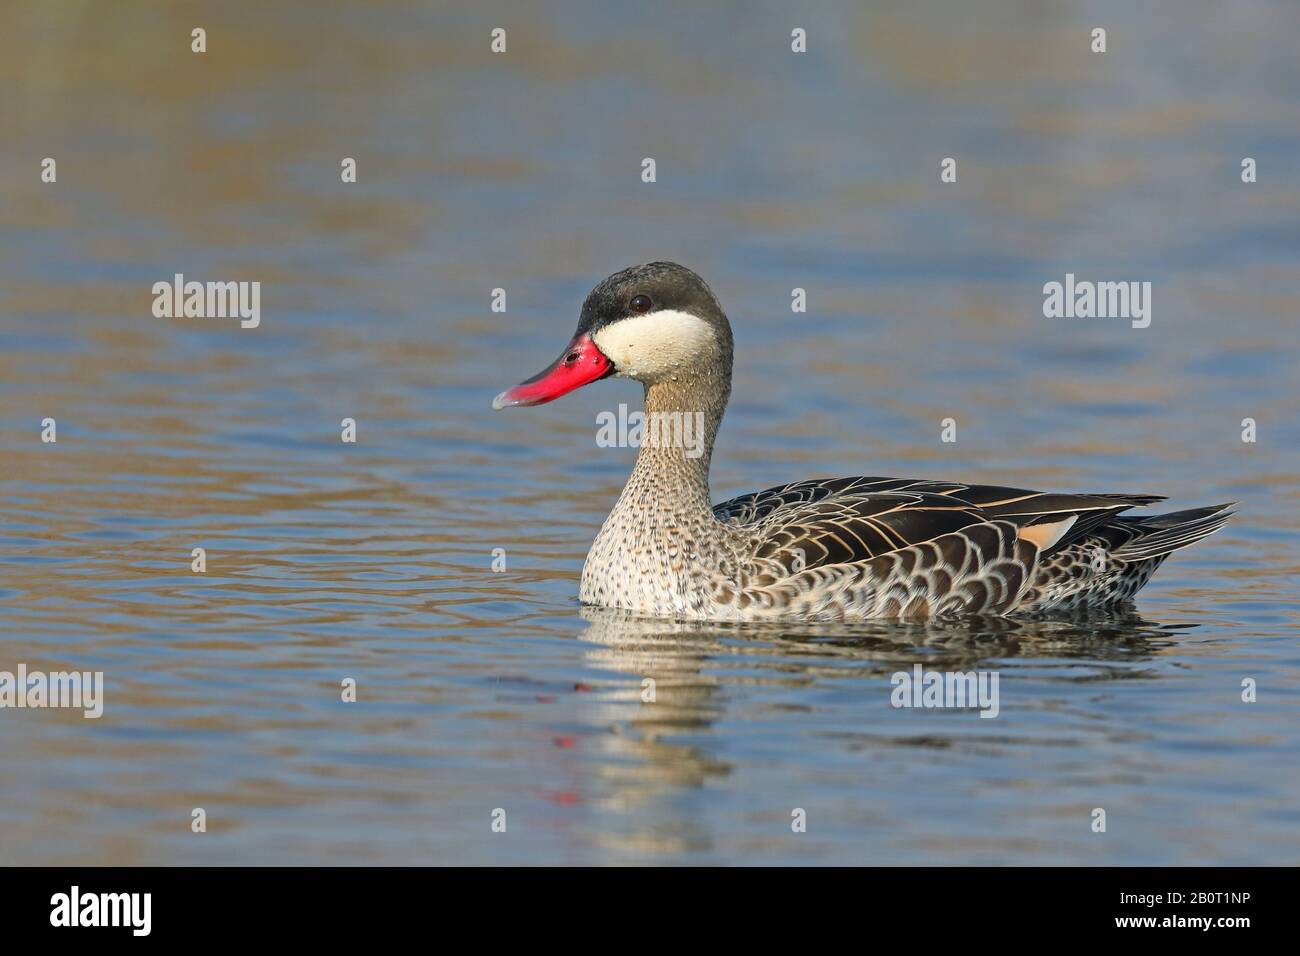 red-billed pintail (Anas erythrorhyncha), swimming, South Africa, Marievale Bird Sanctuary Stock Photo